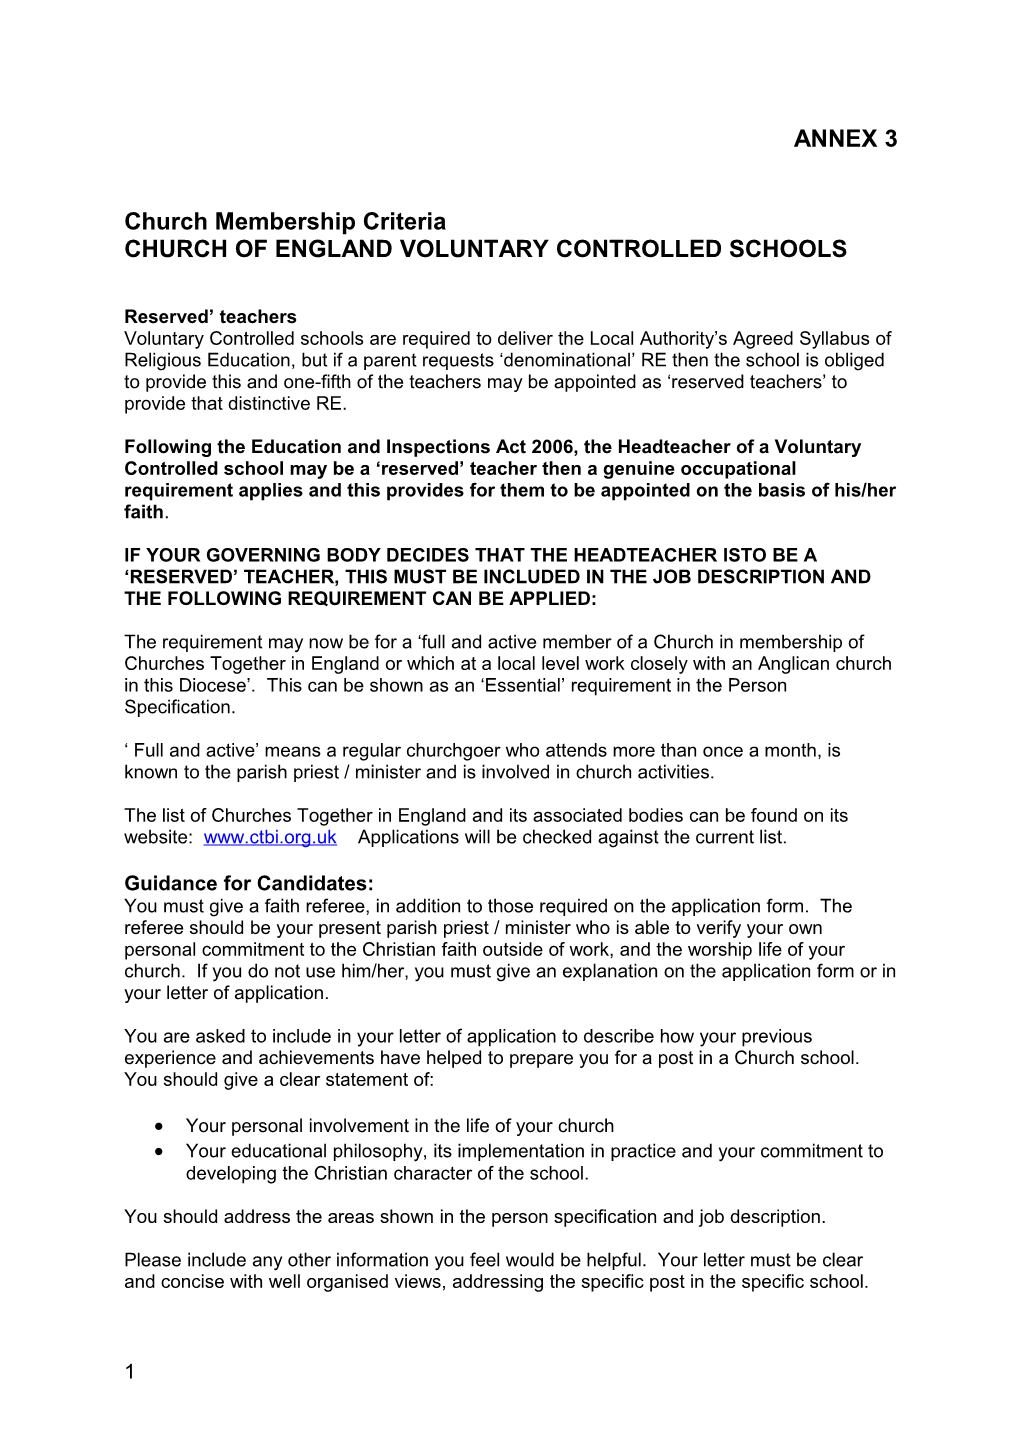 Church of England Voluntary Controlled Schools